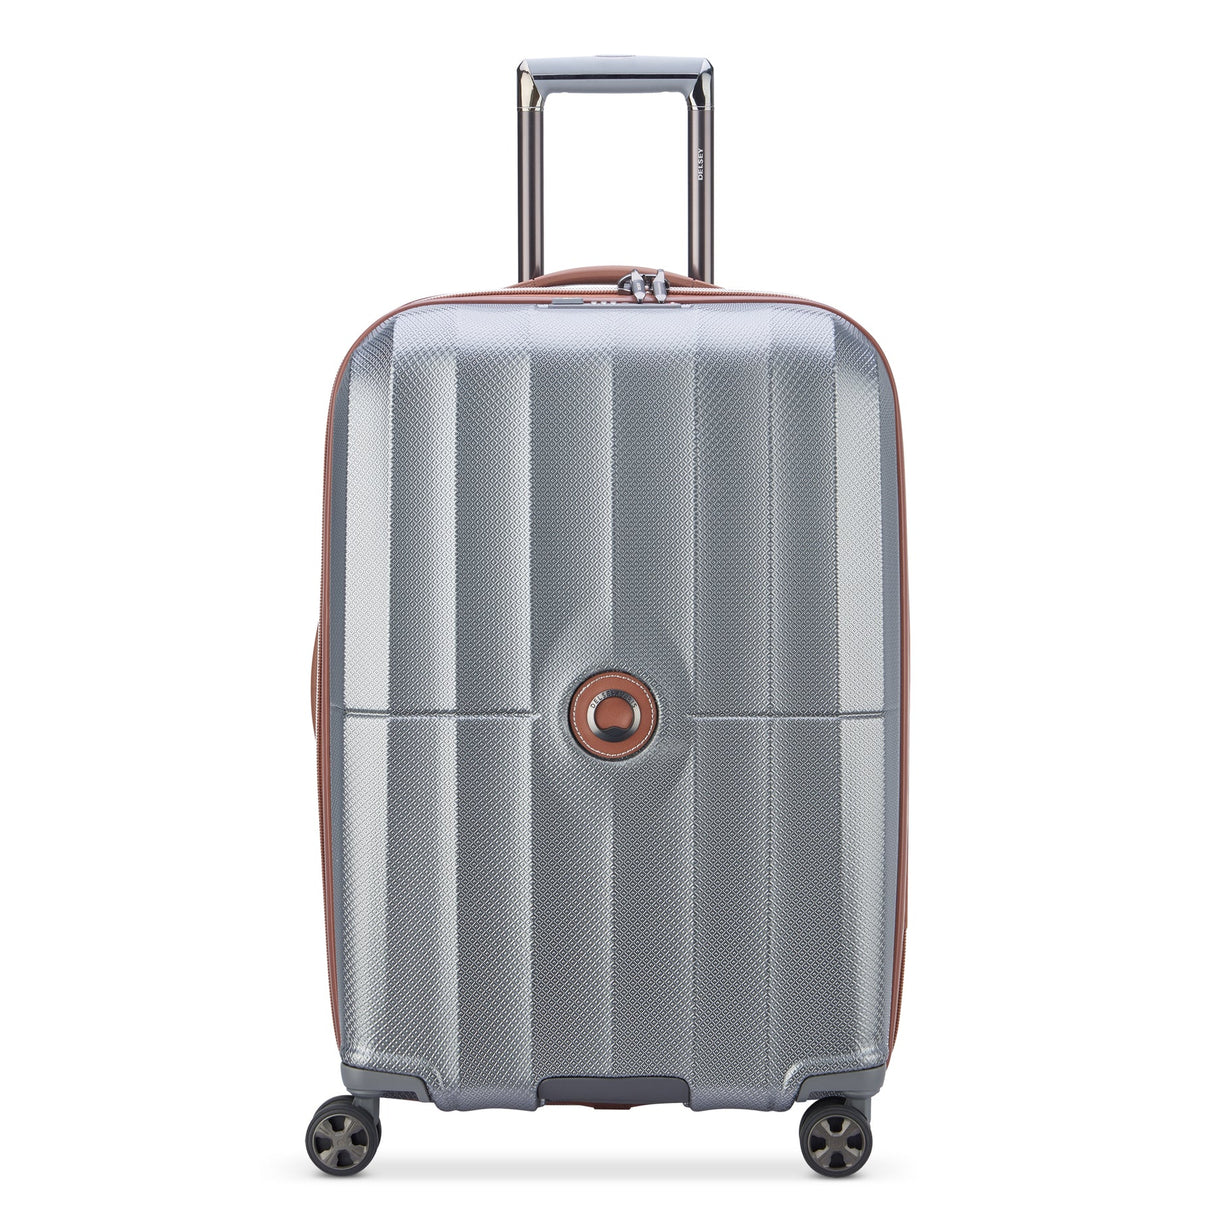 Delsey St Tropez Medium Checked Expandable Spinner , Platinum , delsey-st-tropez-40208782011-01_1800x1800_37a82e43-c7d4-4b3e-a61e-b9ad21a060e5